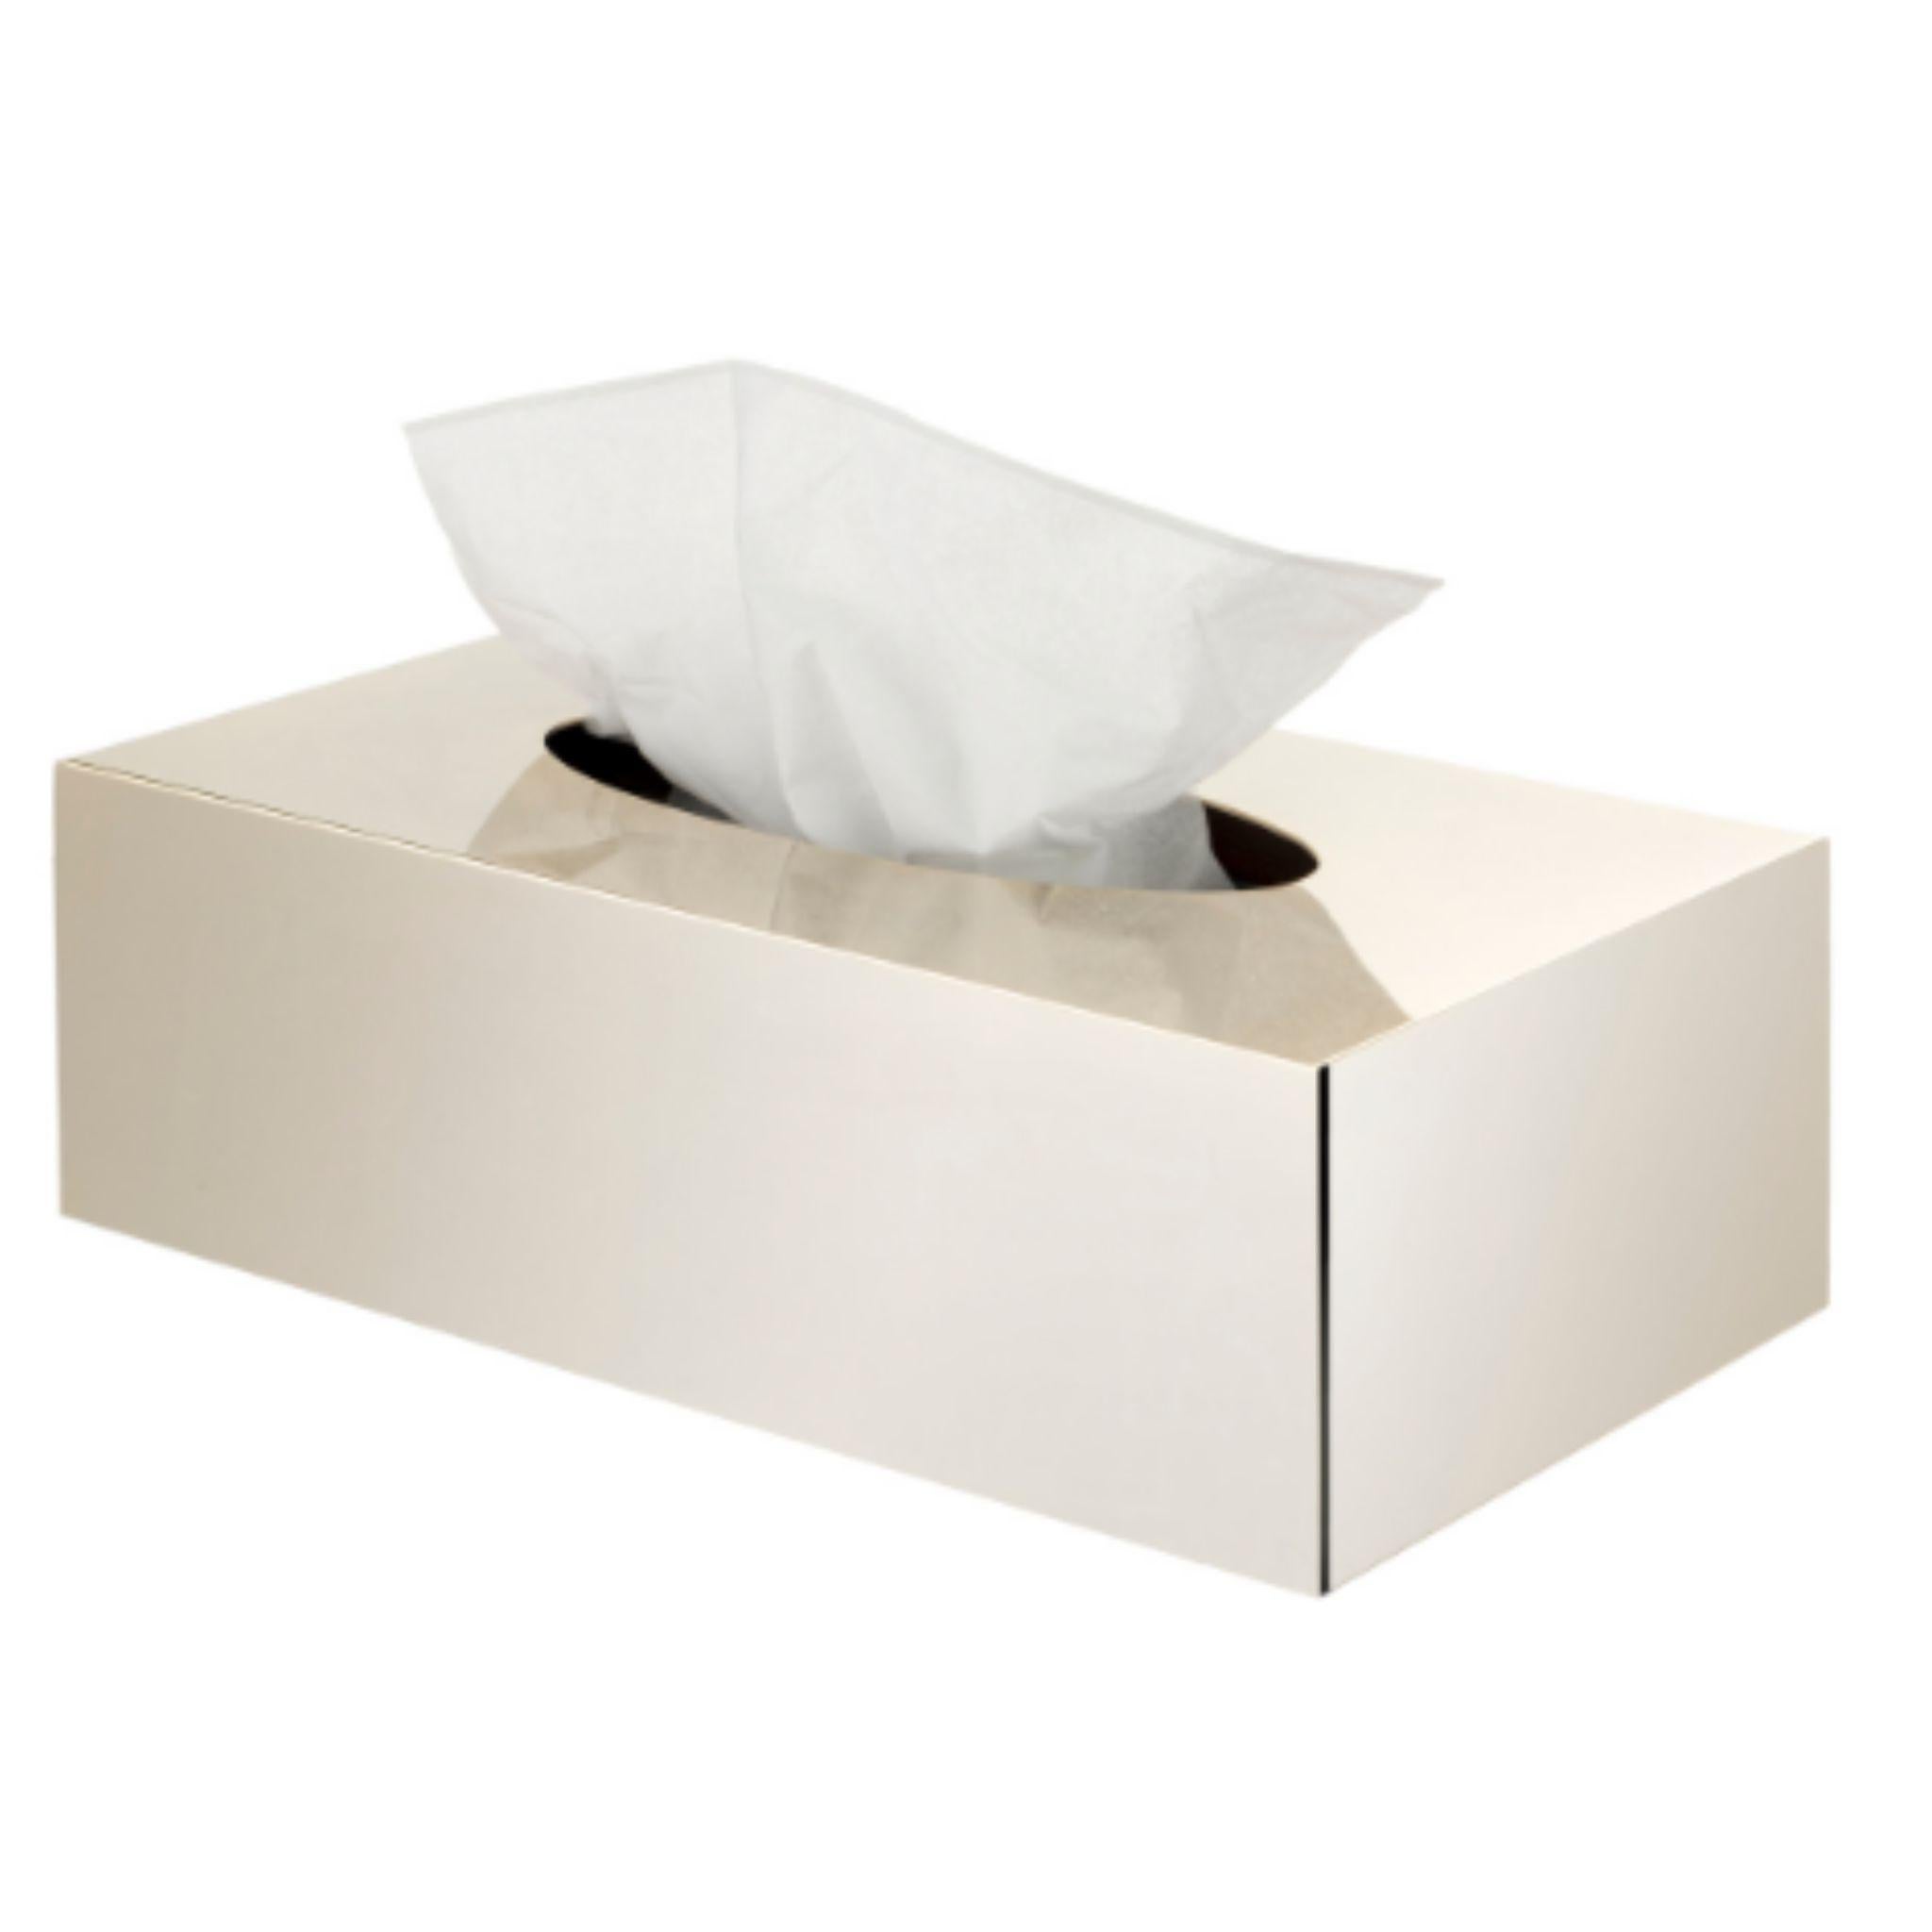 Add a touch of elegance to your tissue storage with our classic rectangular kleenex box. Made from high-quality materials, its stylish and minimalist design adds sophistication to any space. Perfect for holding your tissues in style, it is a